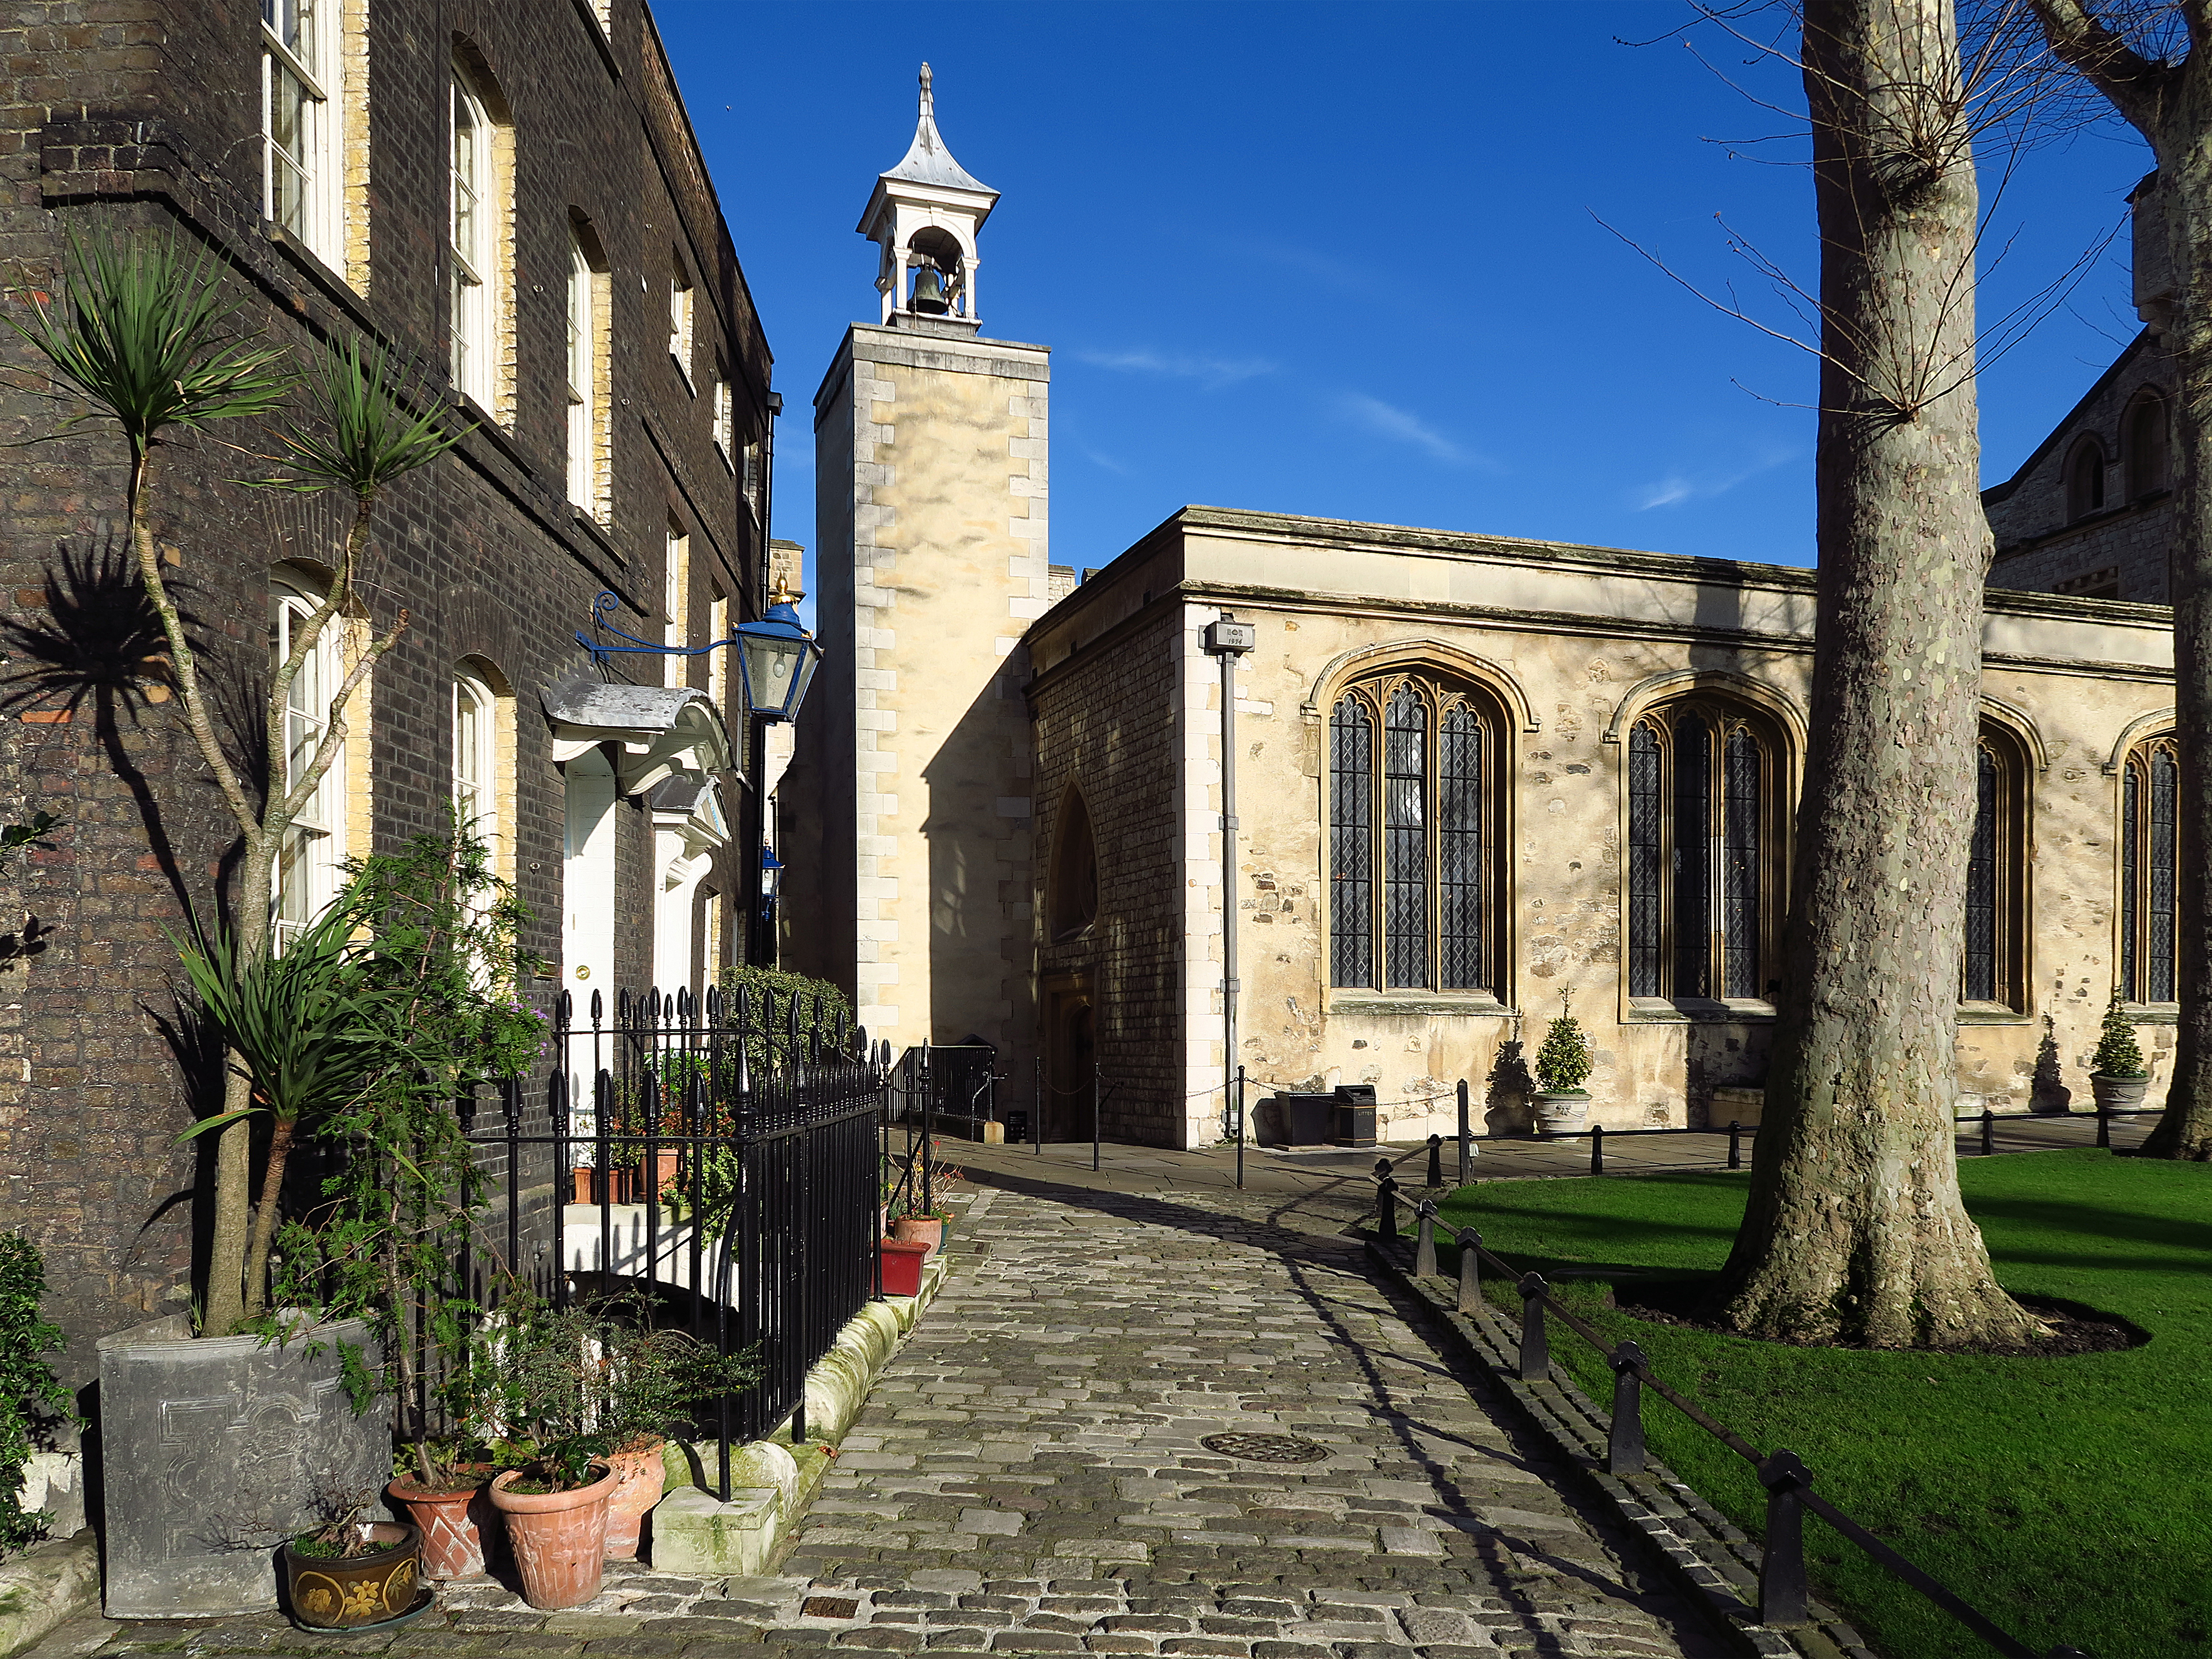 Tower of London, Chapel of St Peter ad Vincula